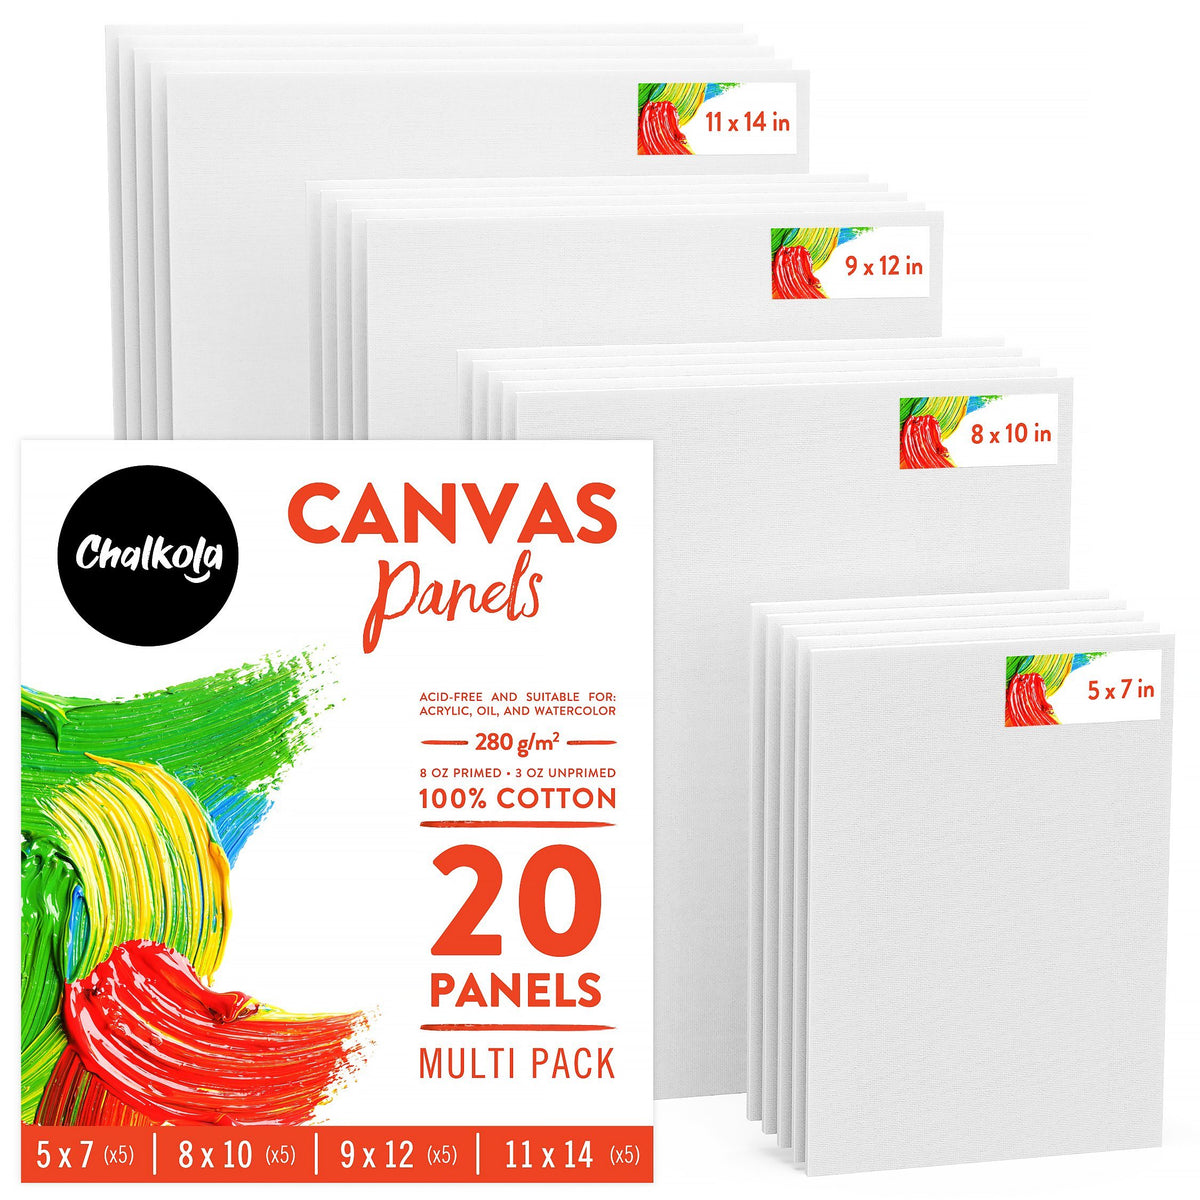 Painting Canvas Panels - 5x7, 8x10, 9x12, 11x14 inch (5 Each, 20 Pack)